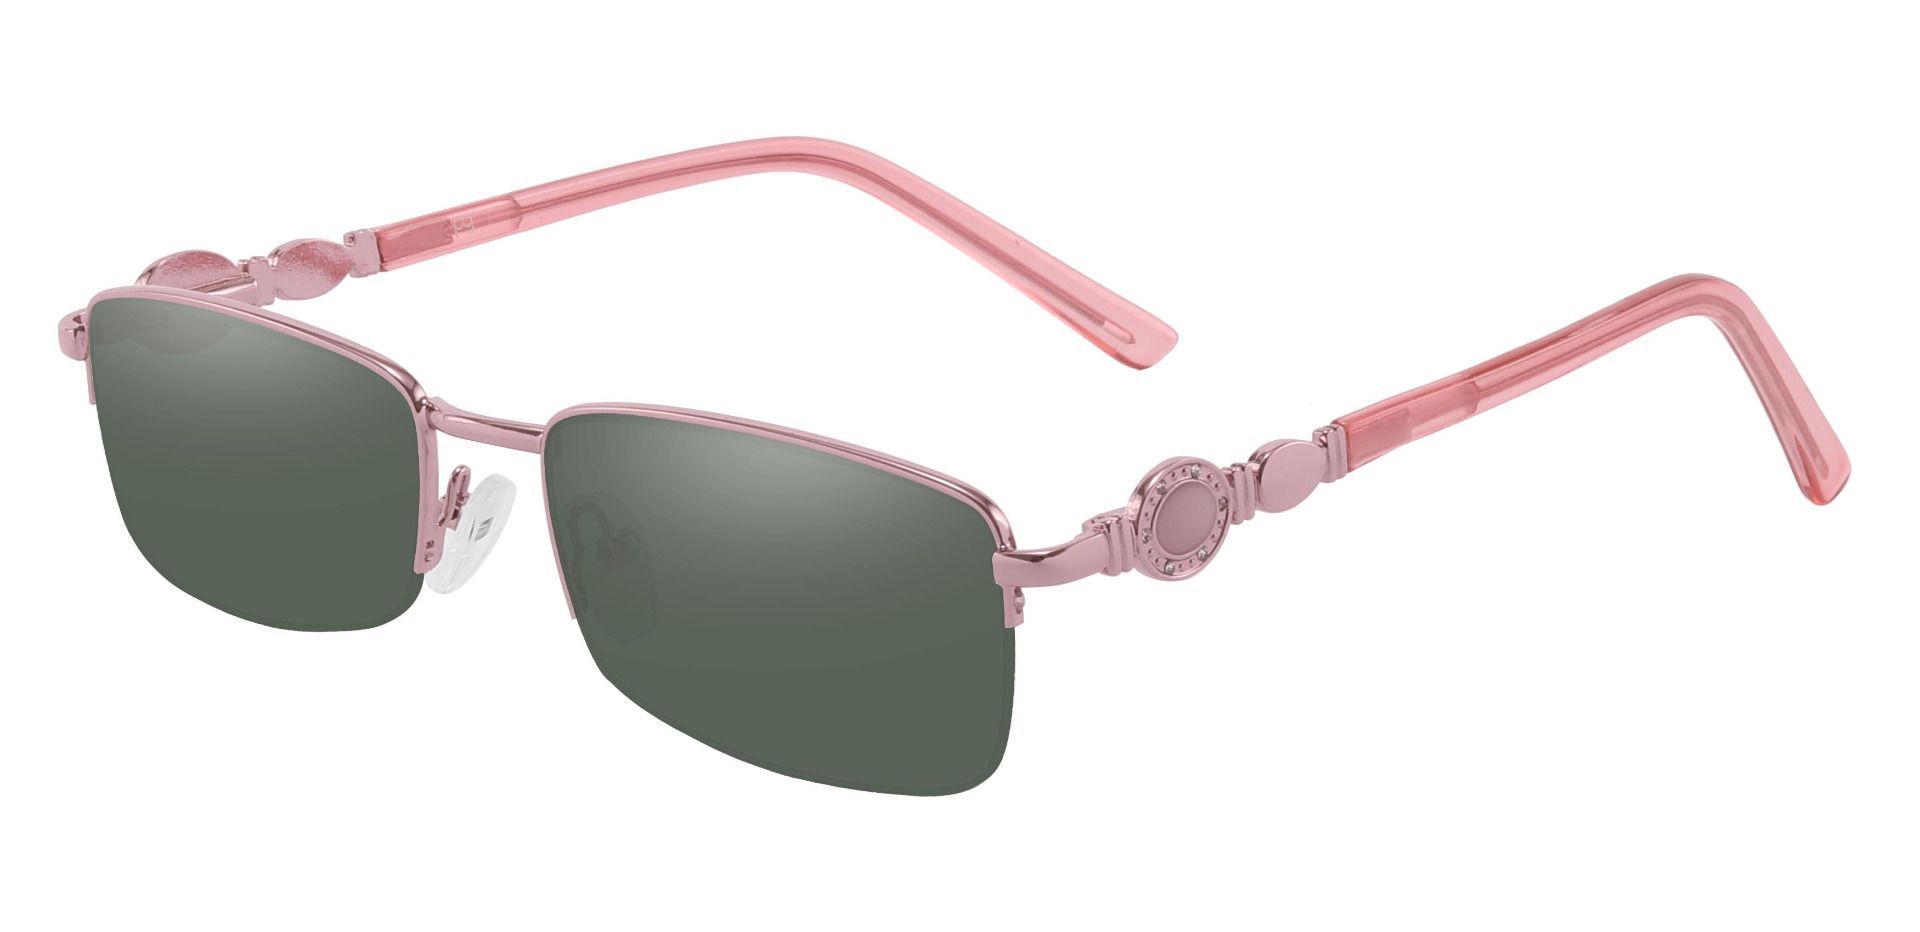 Crowley Rectangle Progressive Sunglasses - Pink Frame With Green Lenses